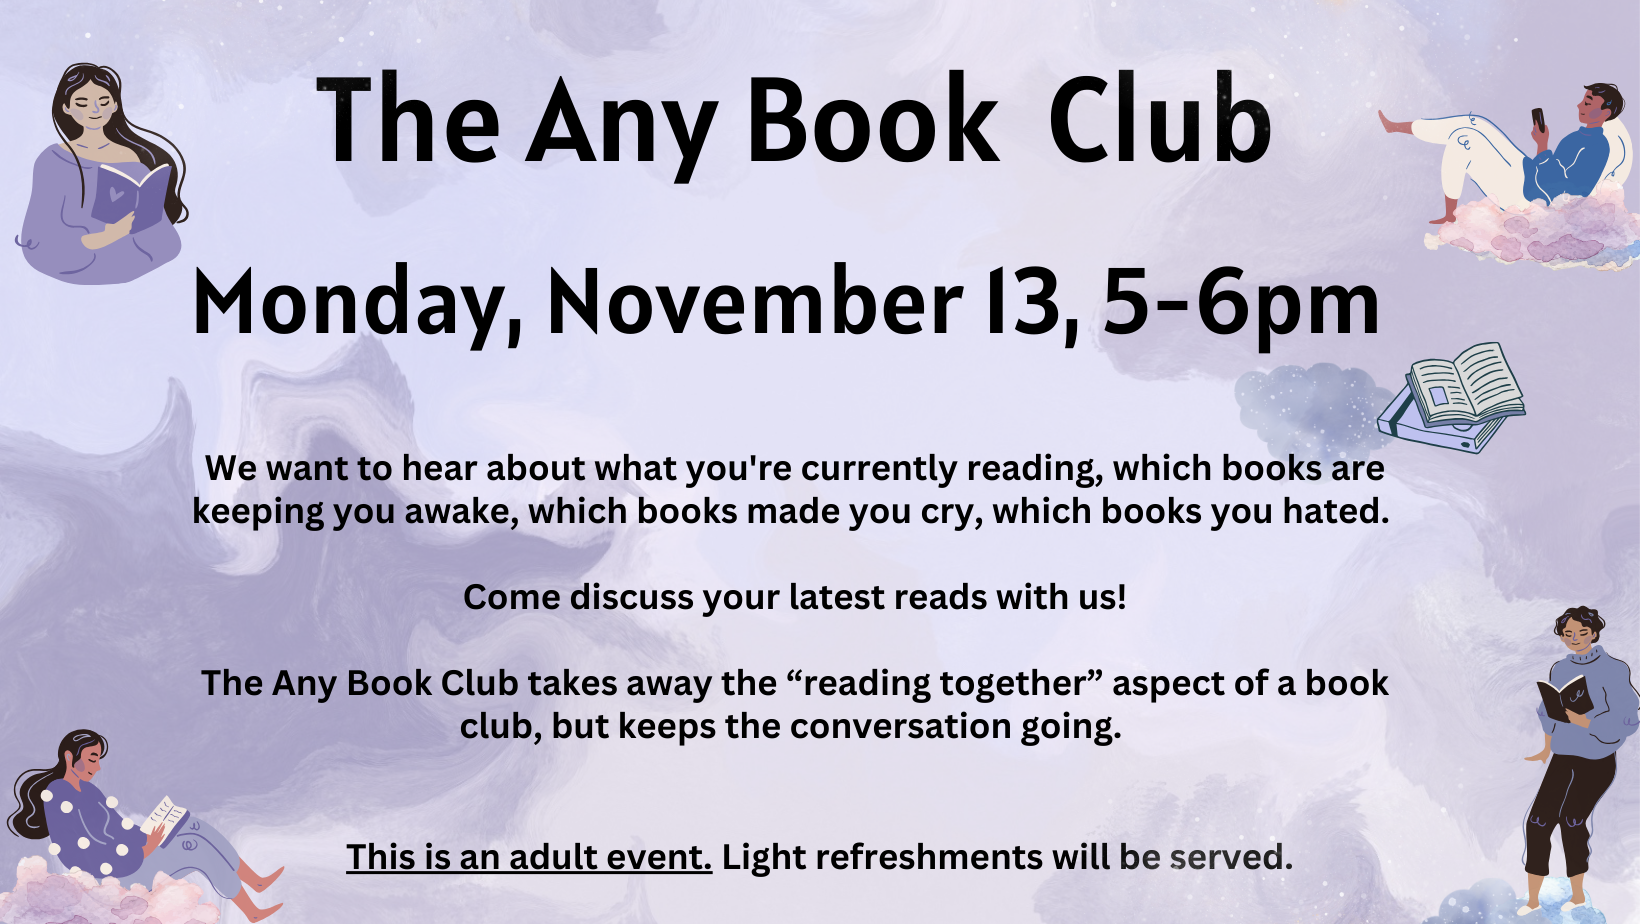 The Any Book Club, Monday, November 13, 5-6 pm